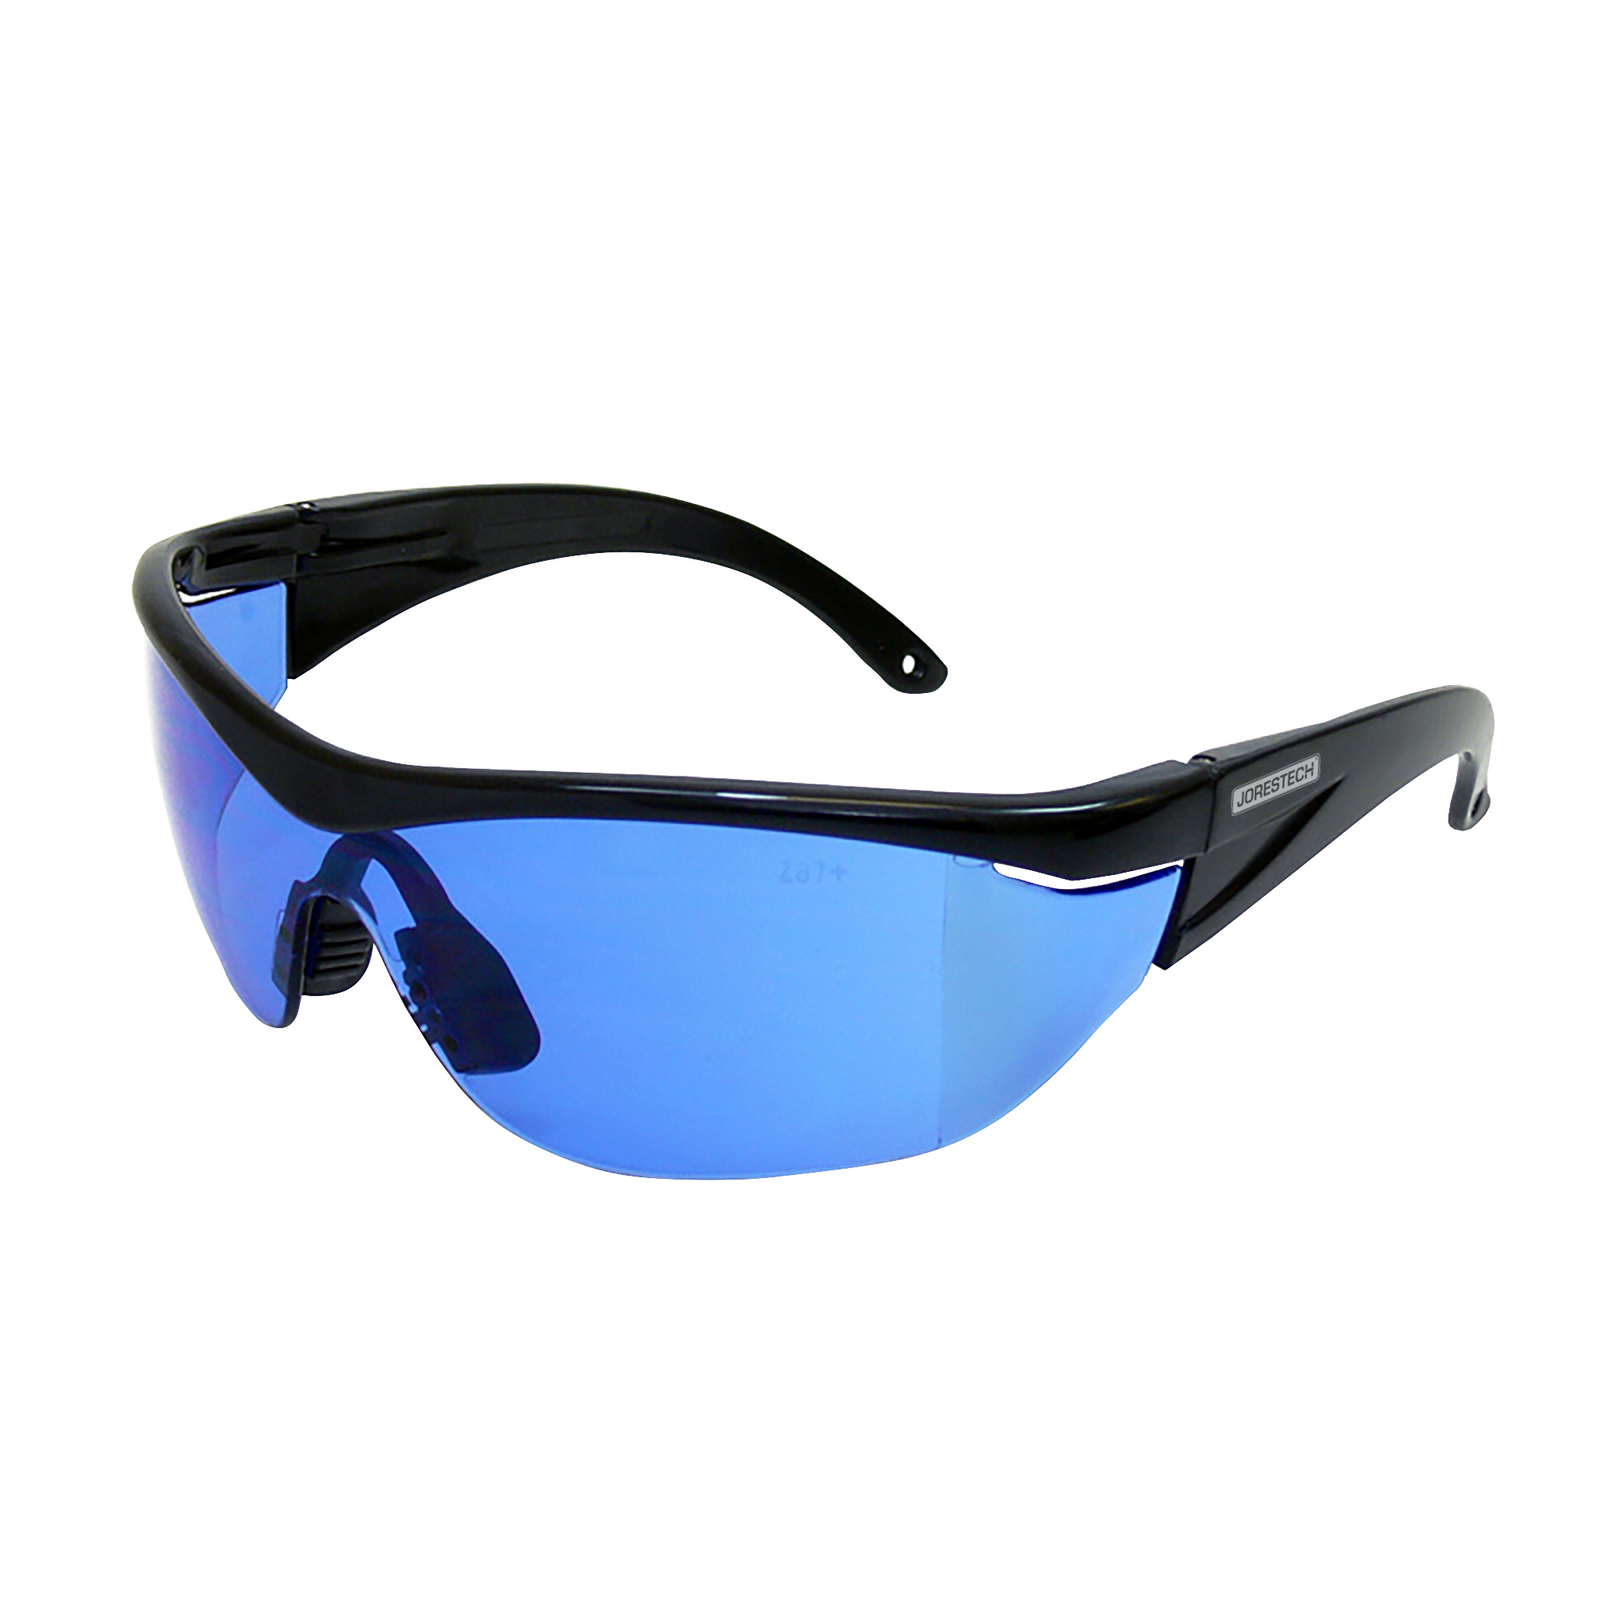 Diagonal view of a modern design framed JORESTECH safety blue glasses with side shields for high impact protection. There is a embedder mark of the polycarbonate glass that reads Z87+ which is the ANSI standard